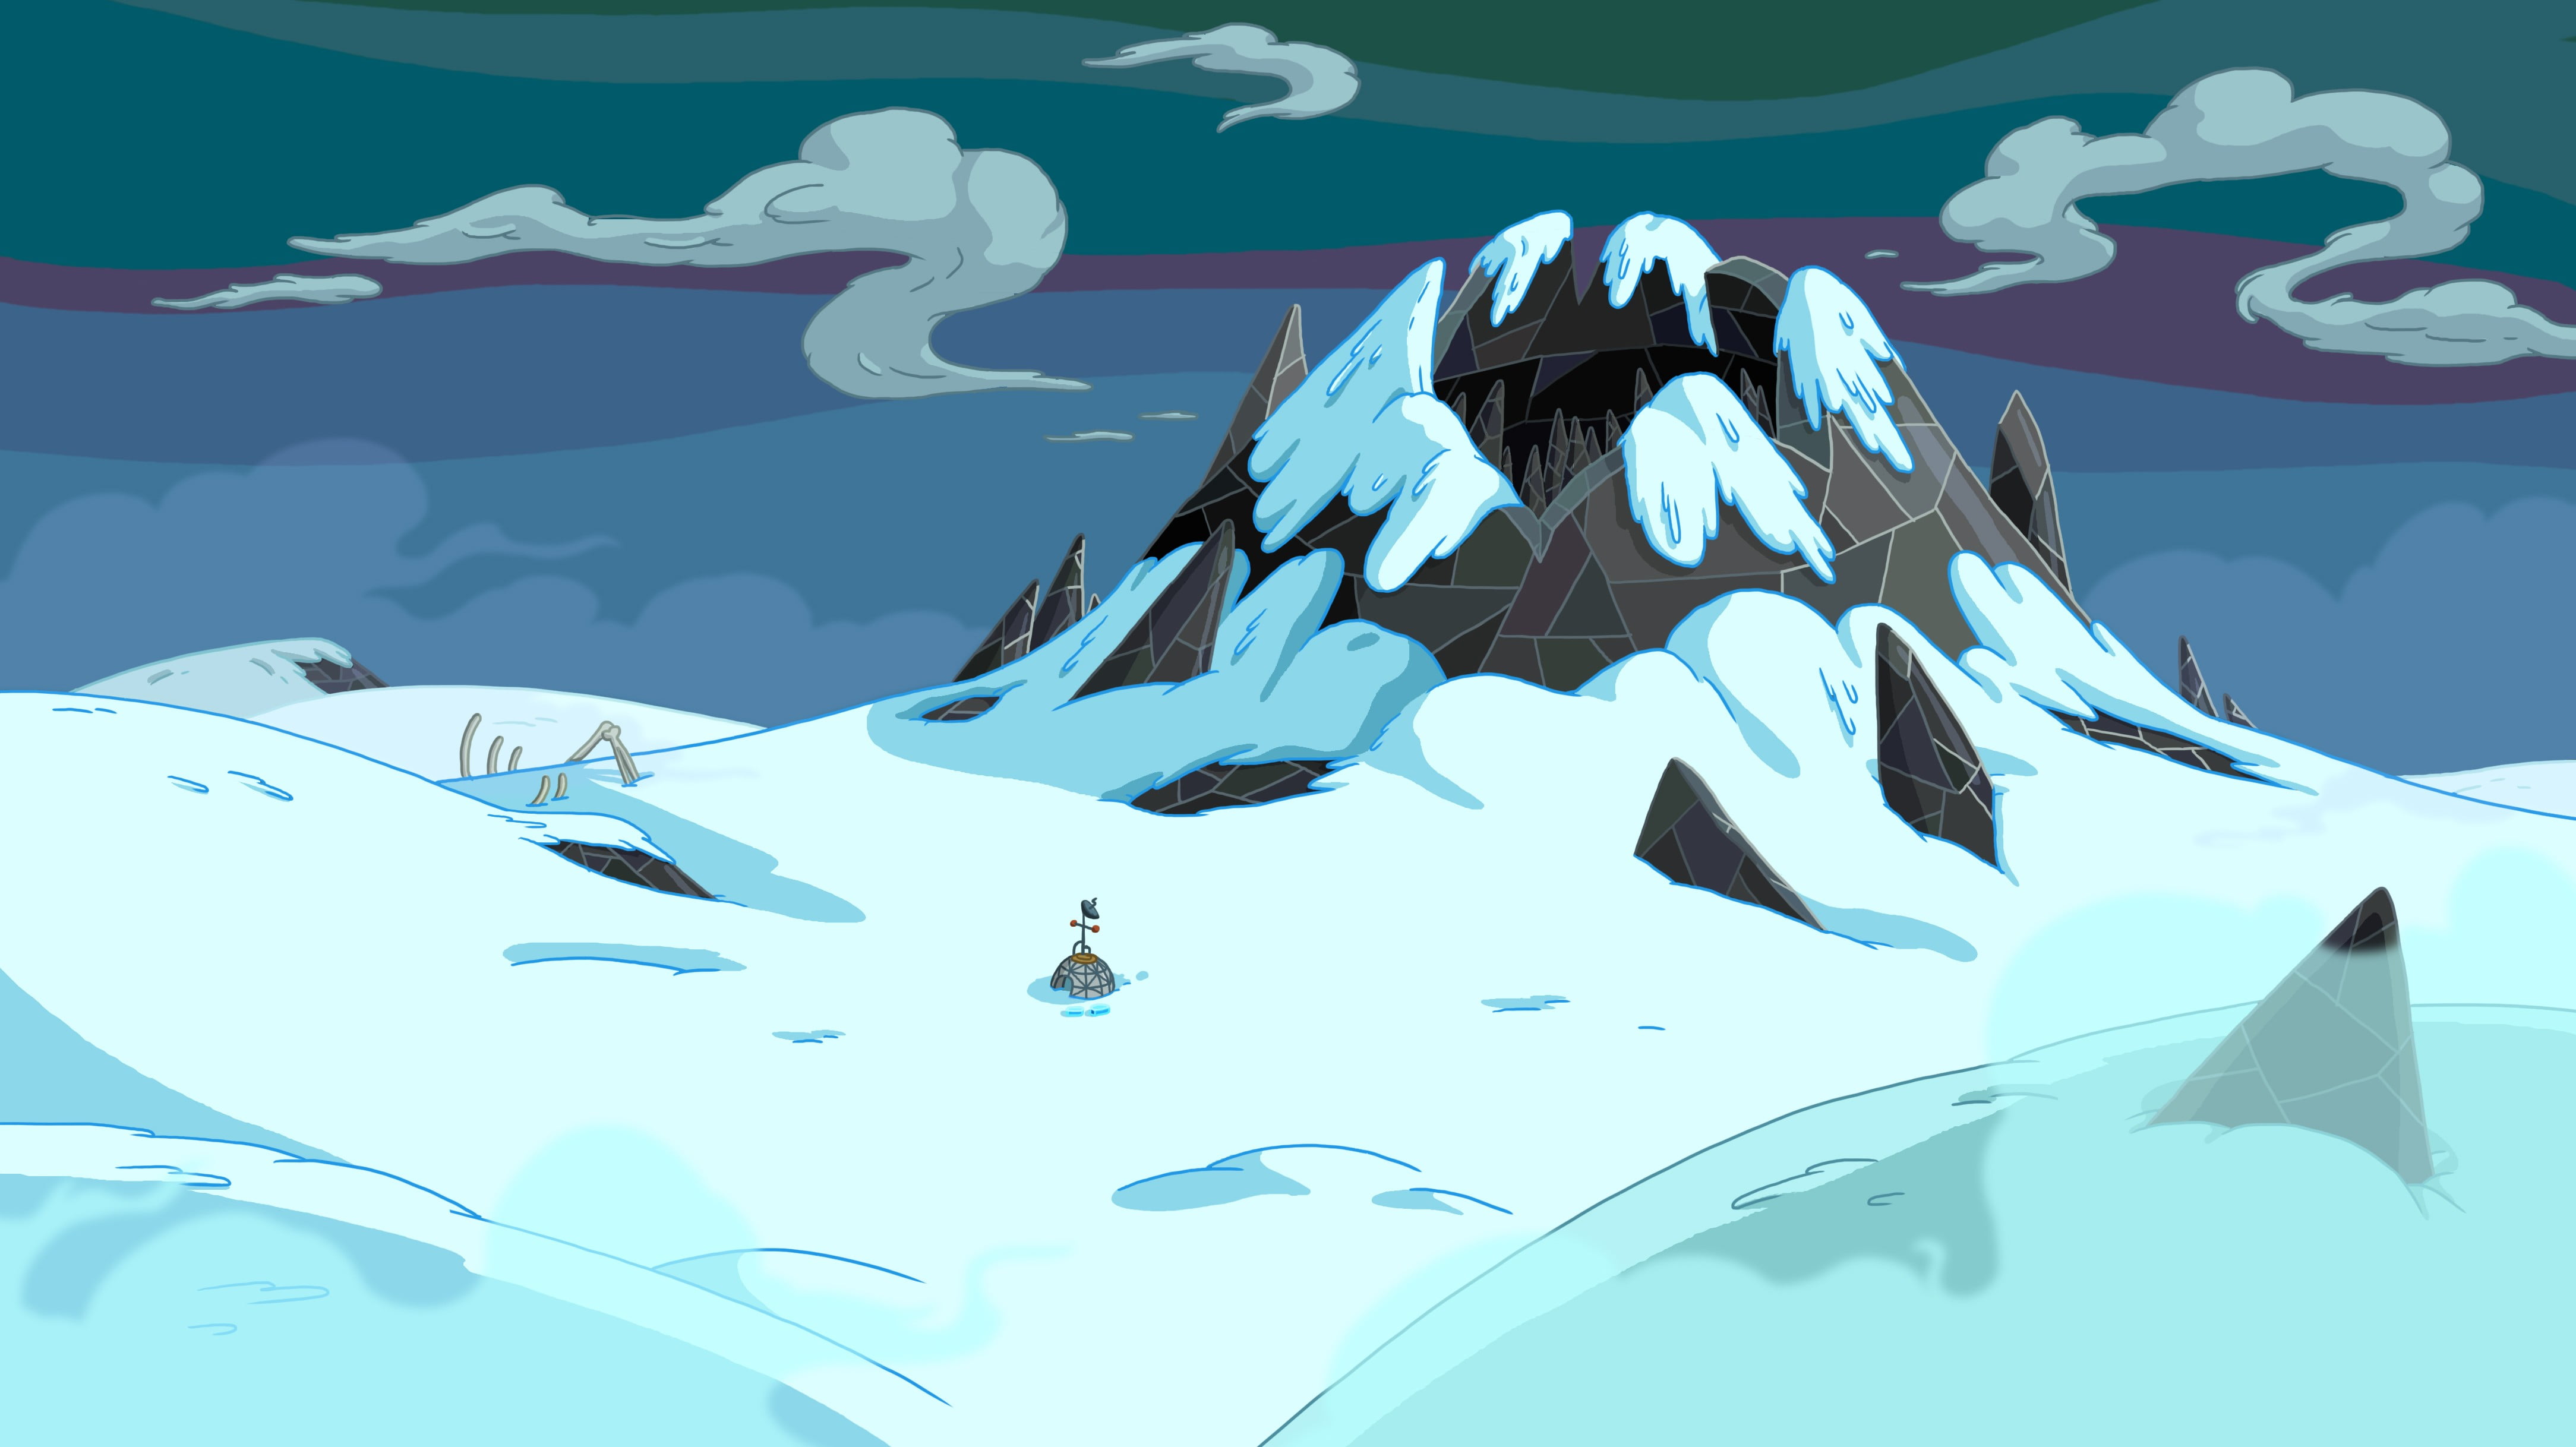 Mountain Covered By Snow Cartoon Illustration Adventure Time Cartoon Hd Wallpaper Wallpaper Flare